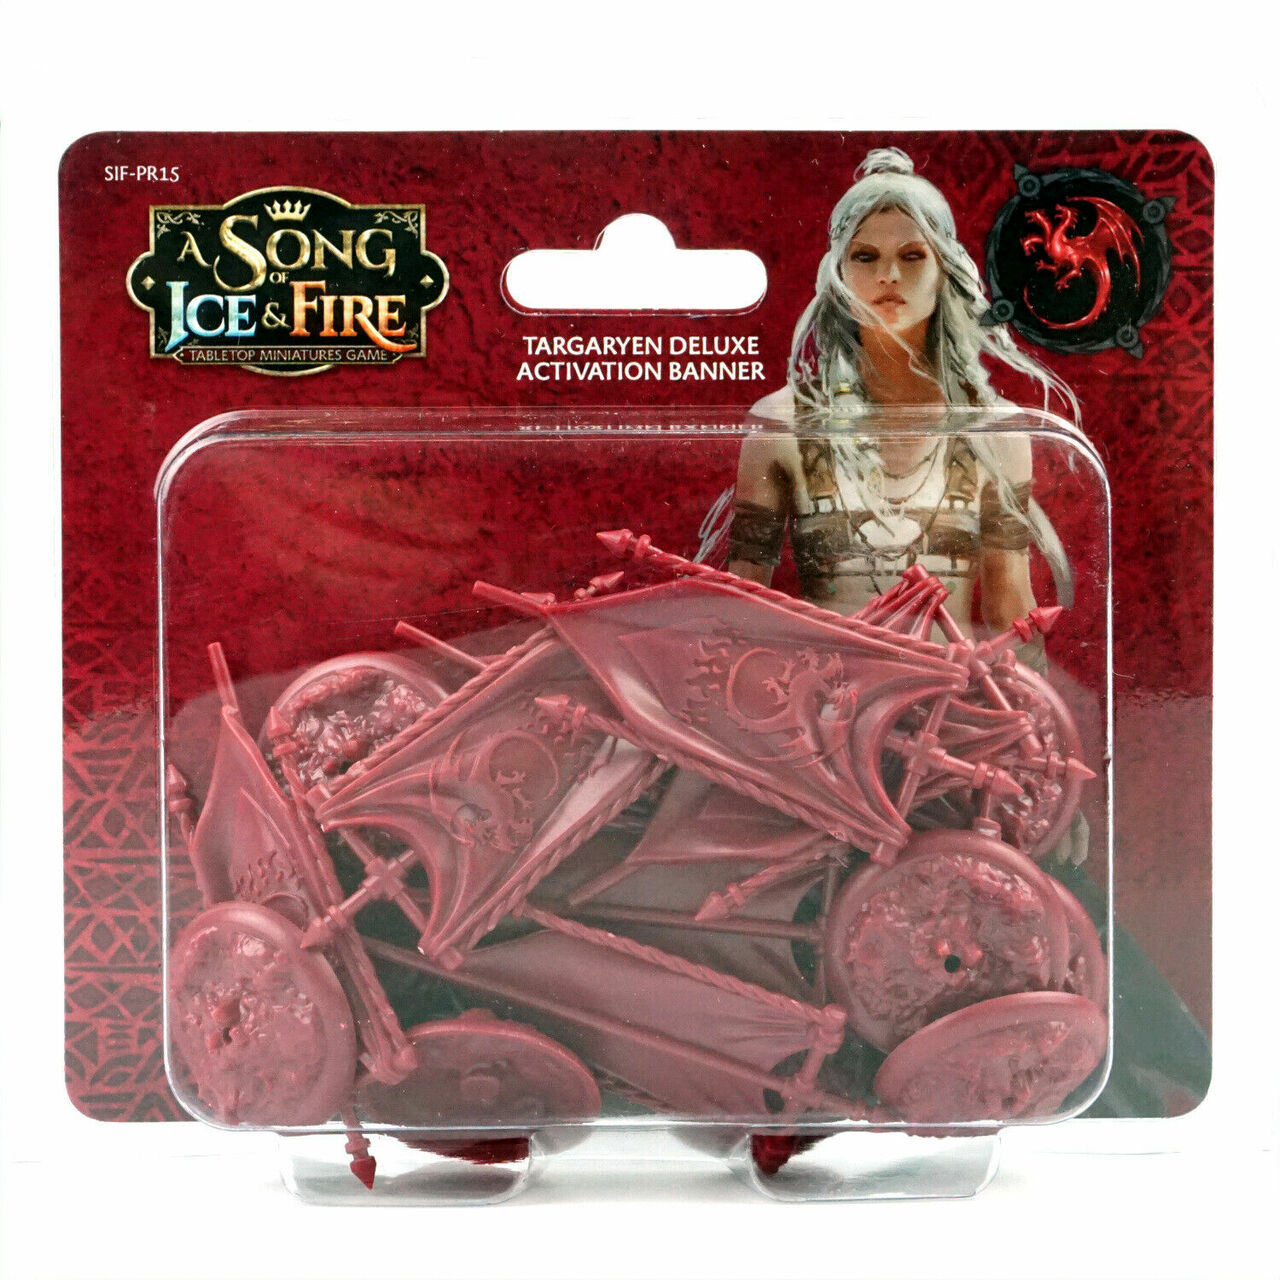 A Song of Ice & Fire: Targaryen - Deluxe Activation Banner 